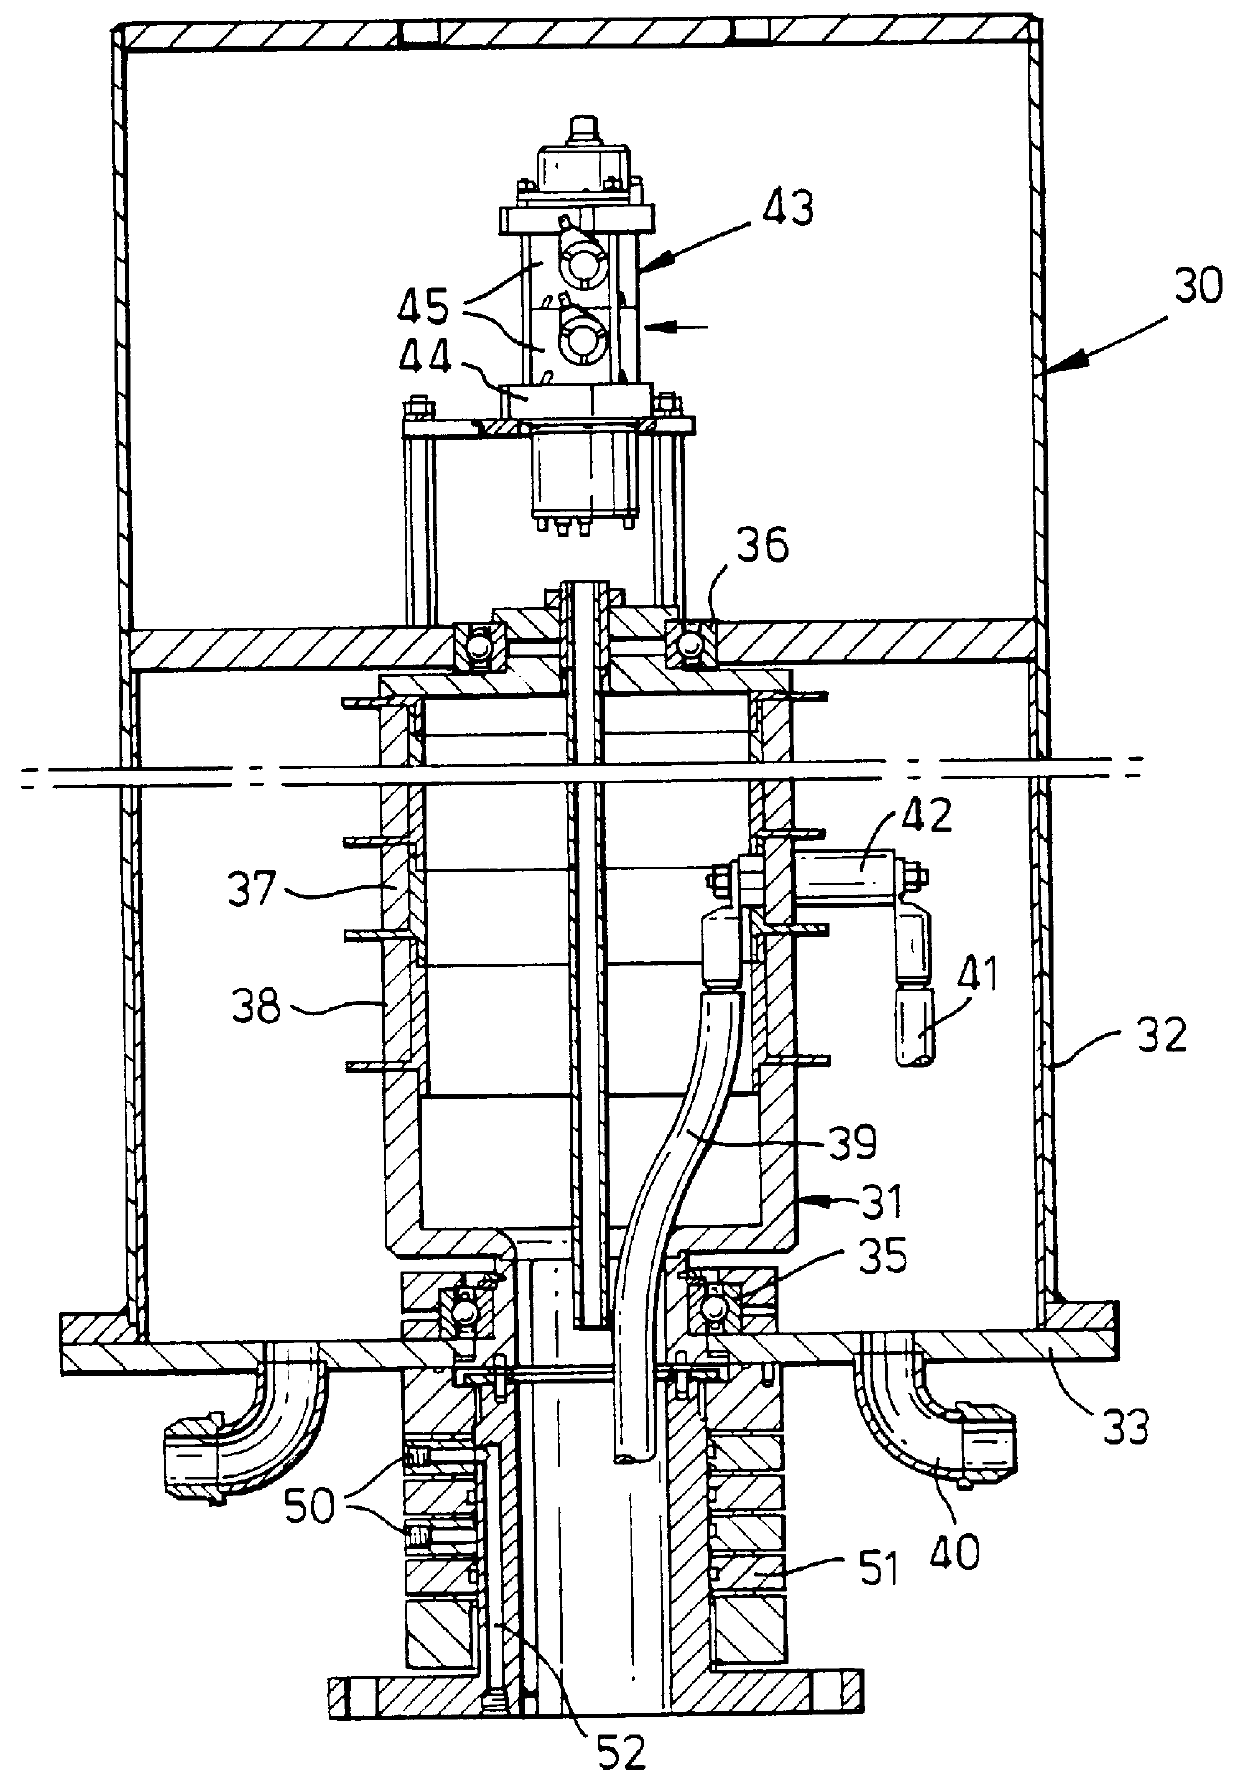 Rotating connector for operative connection between a buoy and a floating vessel for the production of hydrocarbons